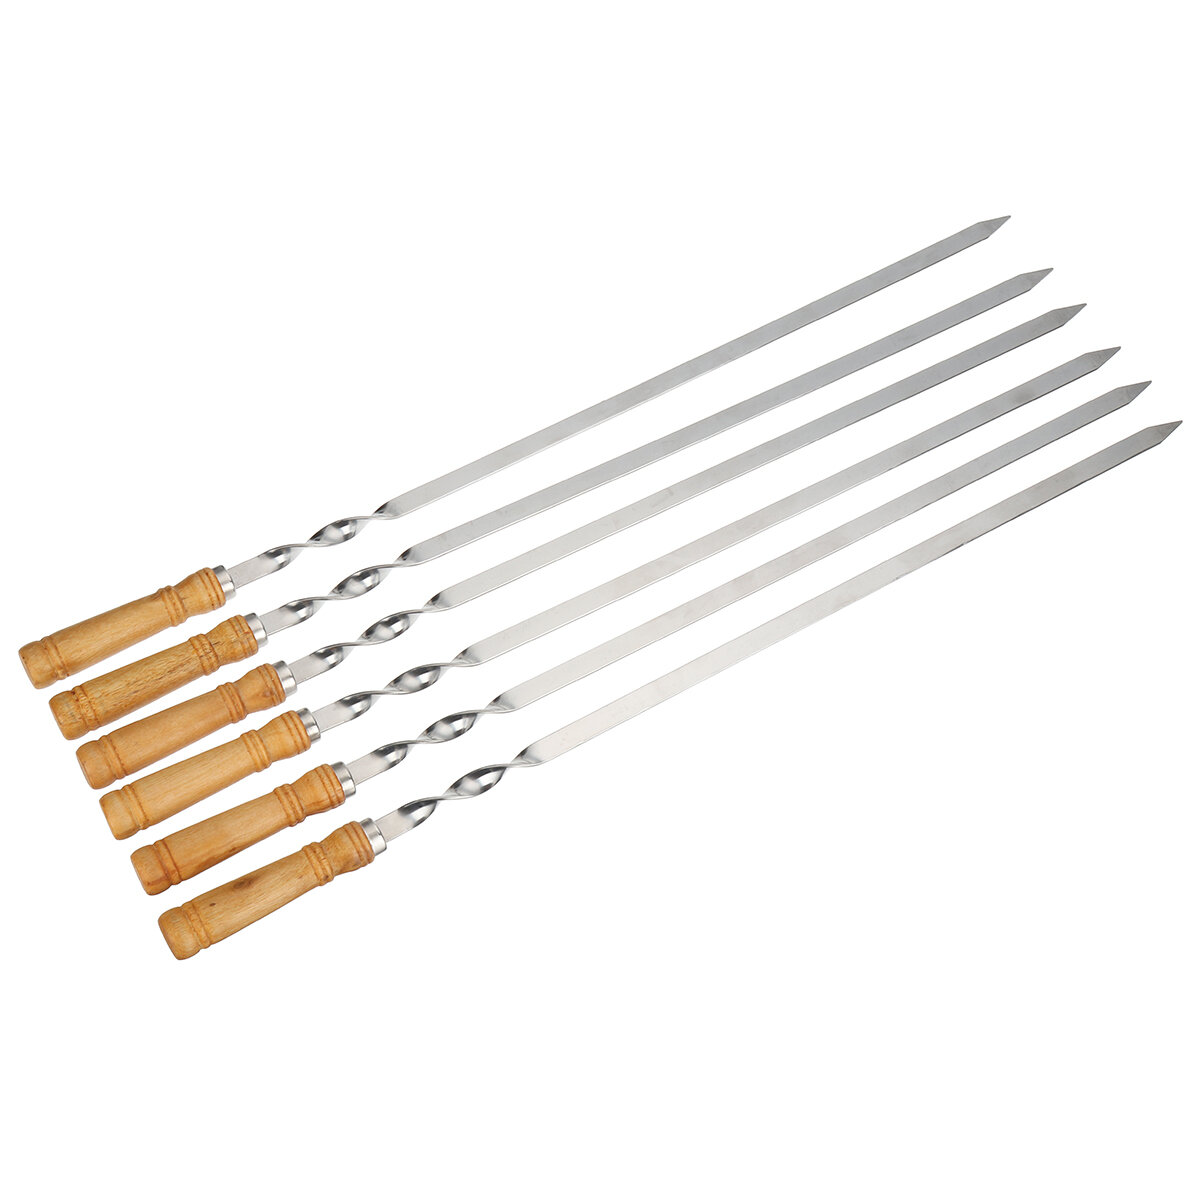 6 Pcs Stainless Steel BBQ Stick Fork Barbecue Needle Camping Picnic Barbecue Tools